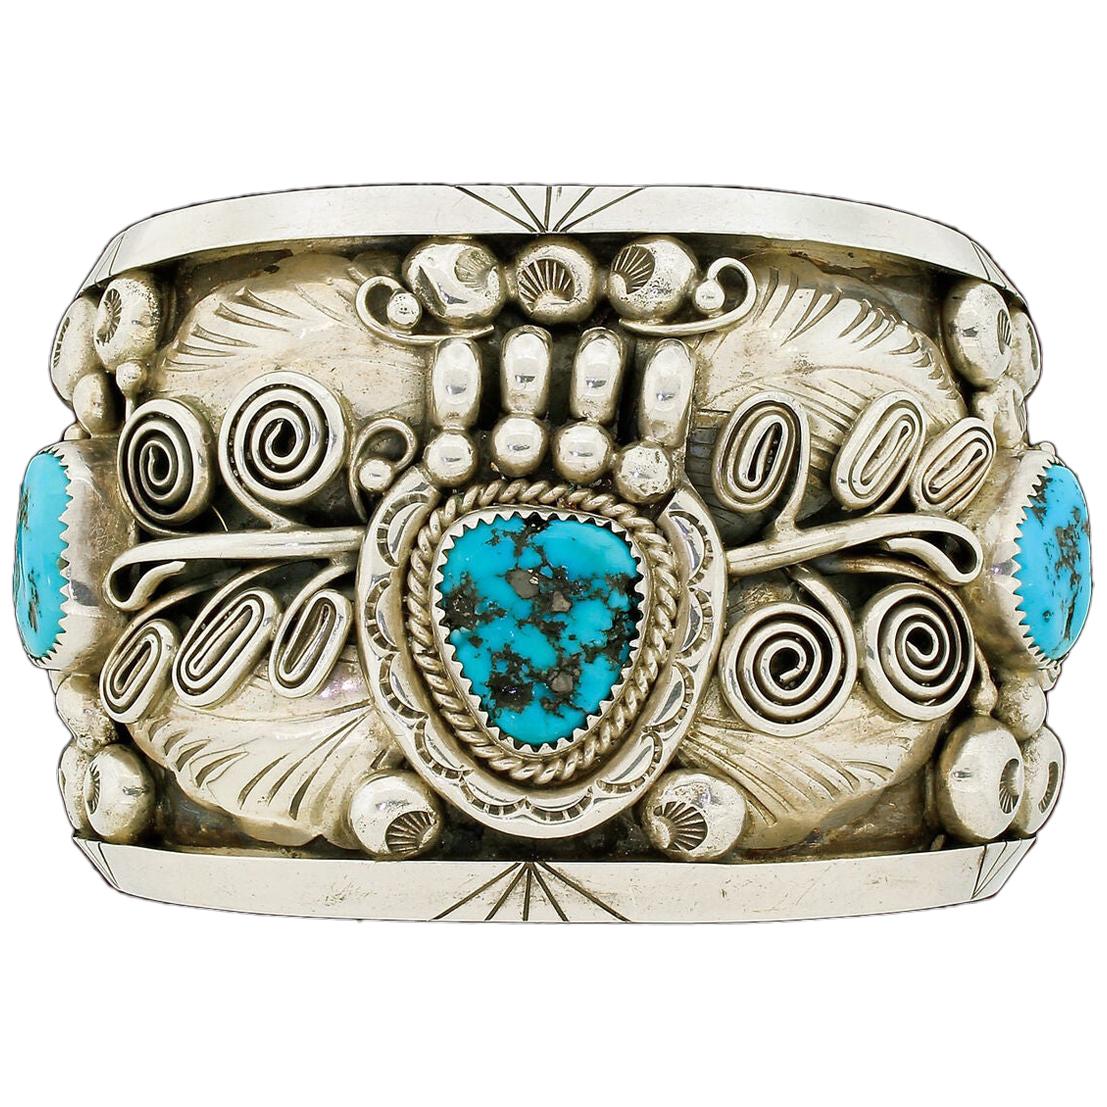 Native American Sterling Silver Wide Turquoise Cuff Bracelet Ornate 150G